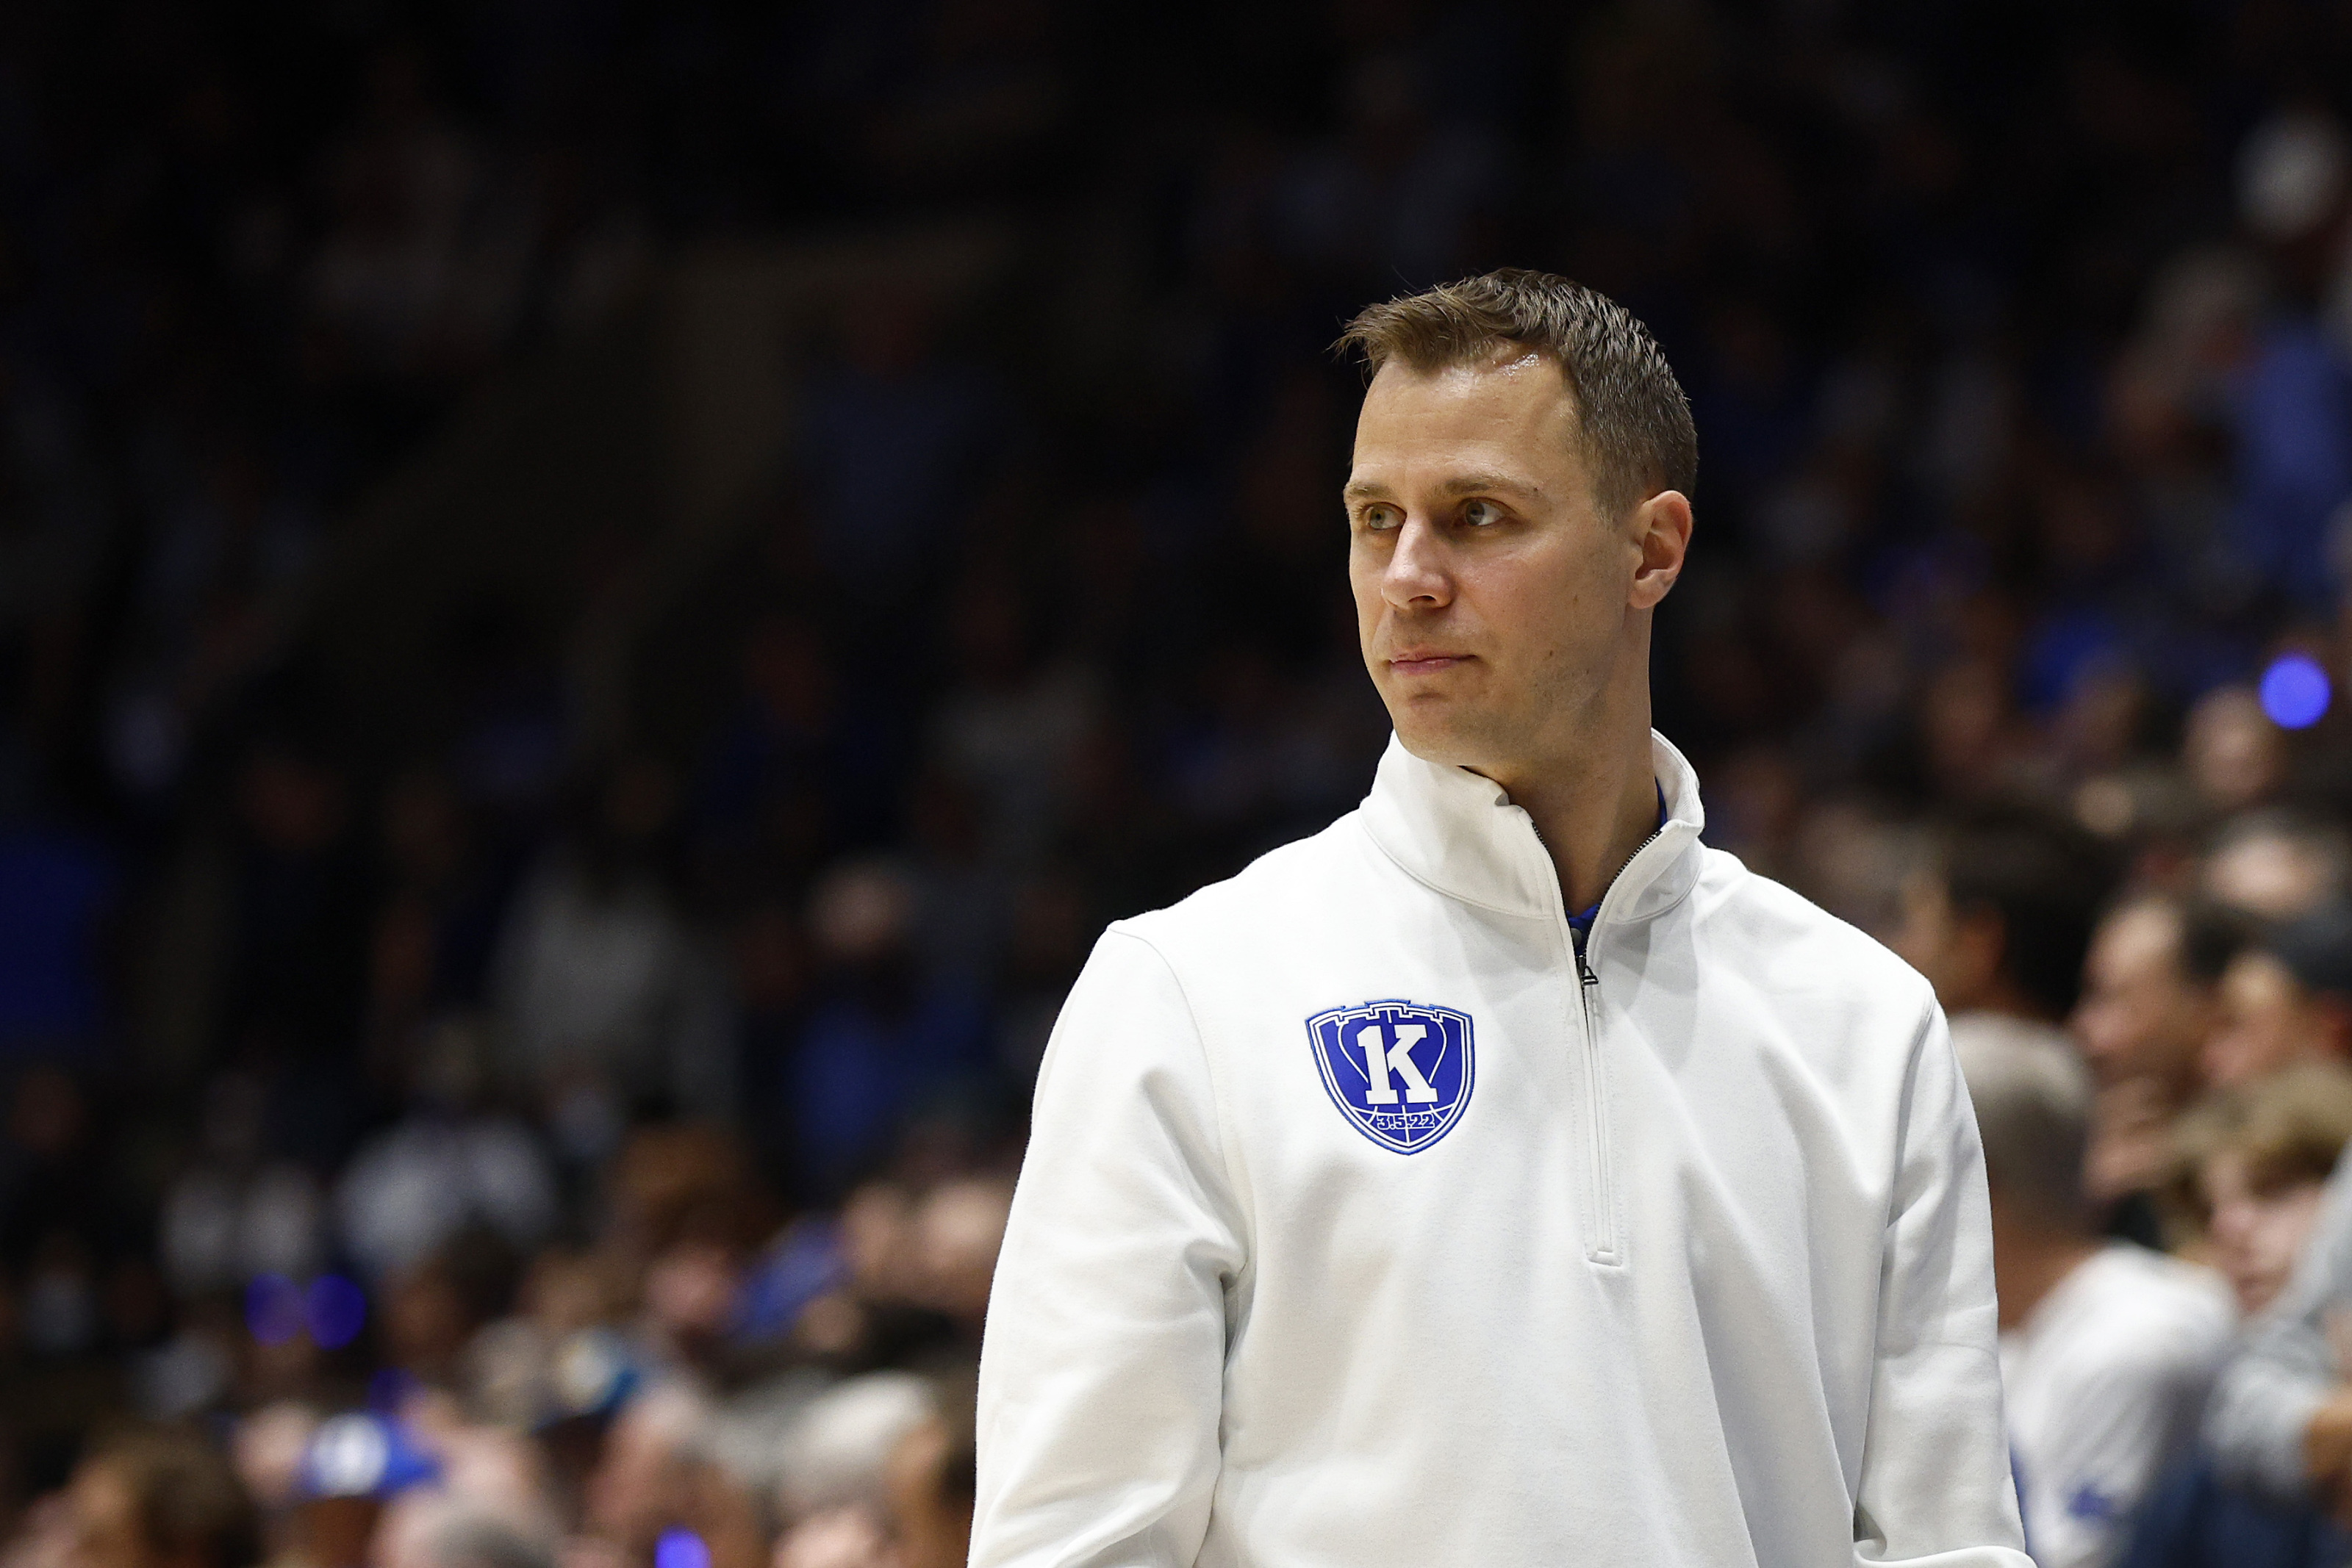 Look For Jon Scheyer To Be Named Coach-In-Waiting - Duke Basketball Report